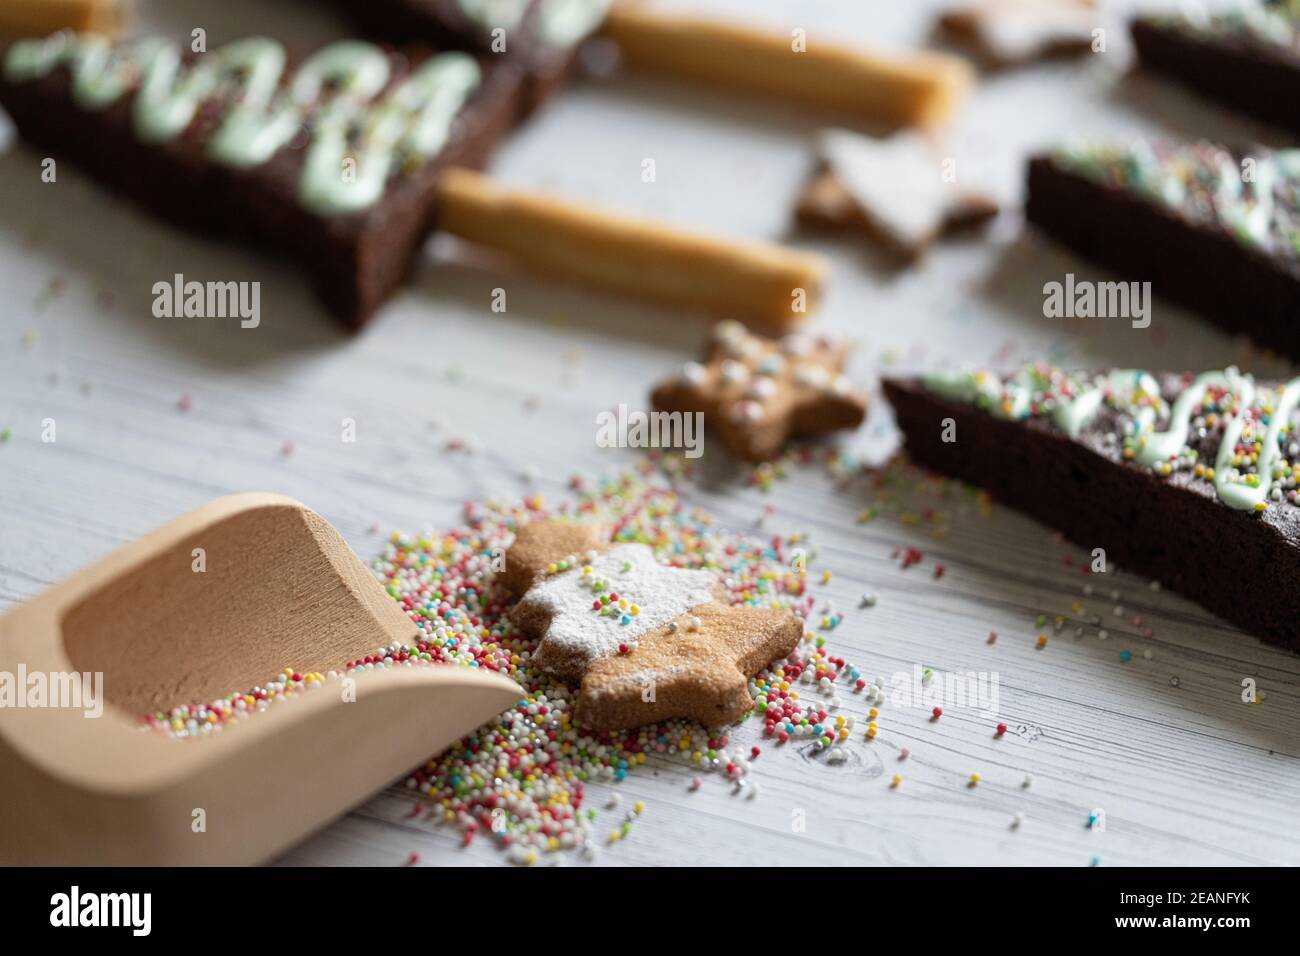 Homemade cookie in shape of Christmas tree and chocolate brownies decorated with sugar balls, Italy, Europe Stock Photo